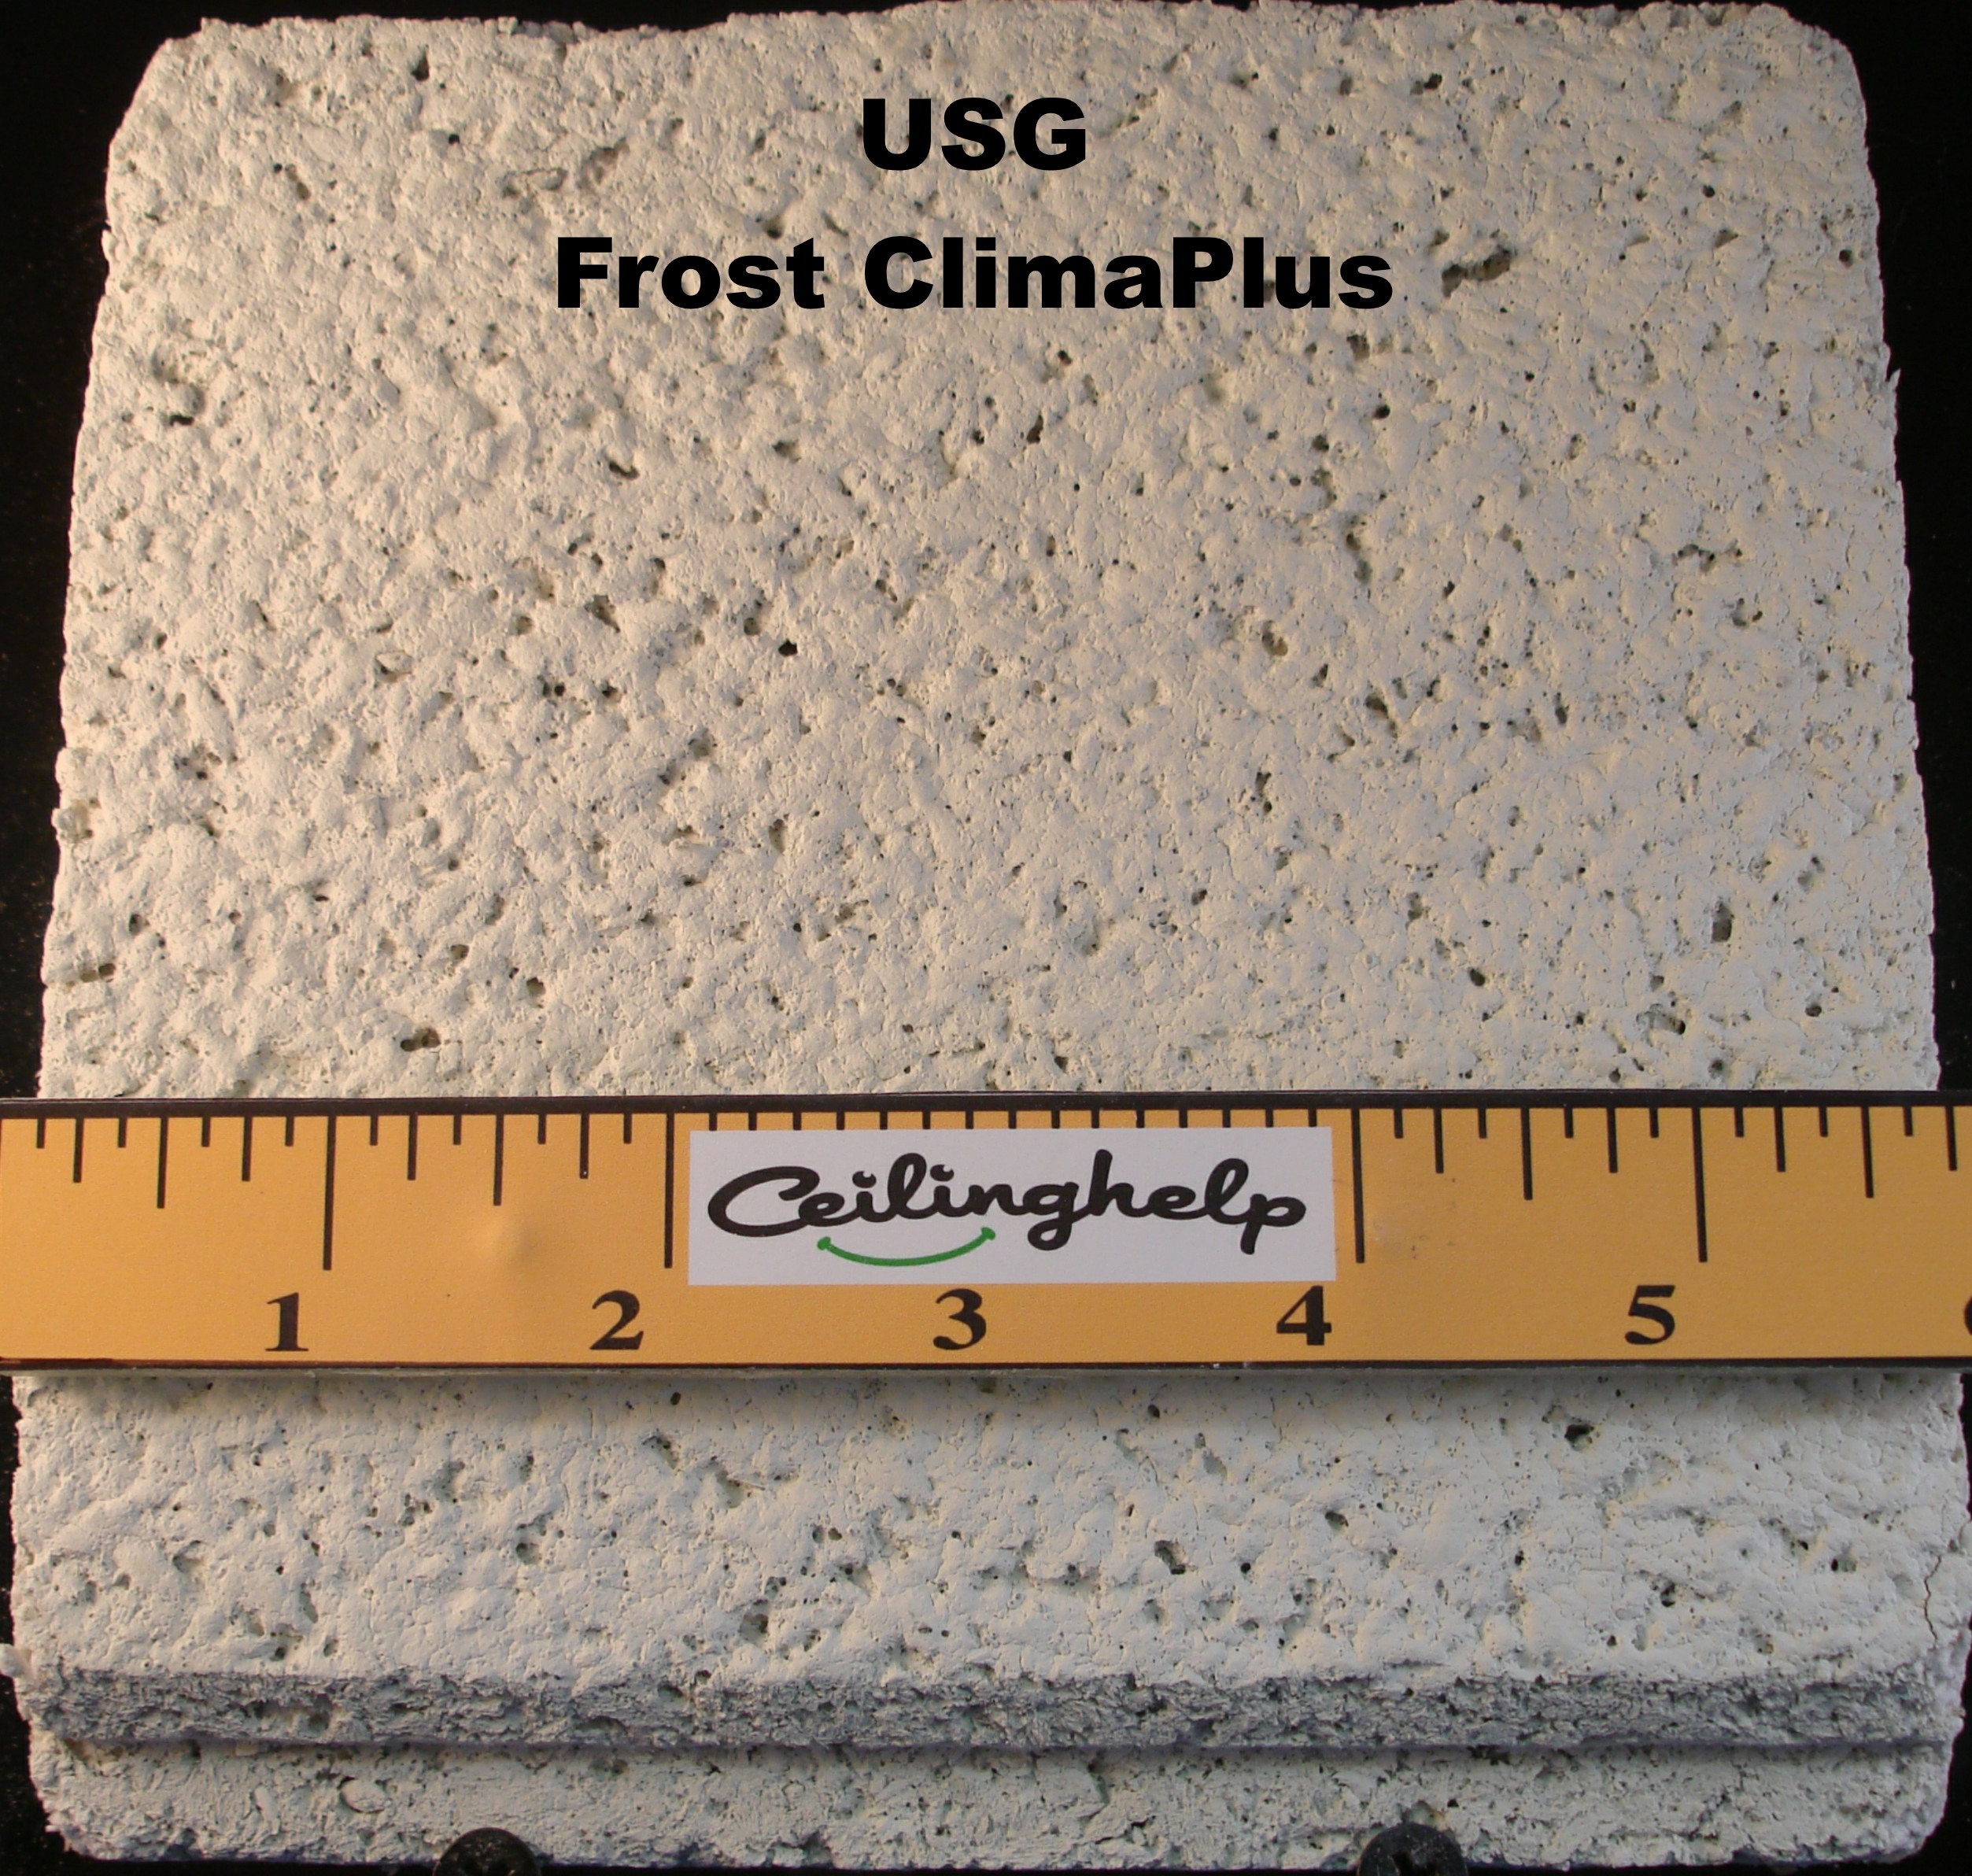 Usg Ceiling Tiles Frost Usg Ceiling Tiles Frost usg crossover chart at wwwceilinghelp ceiling help 2506 X 2384